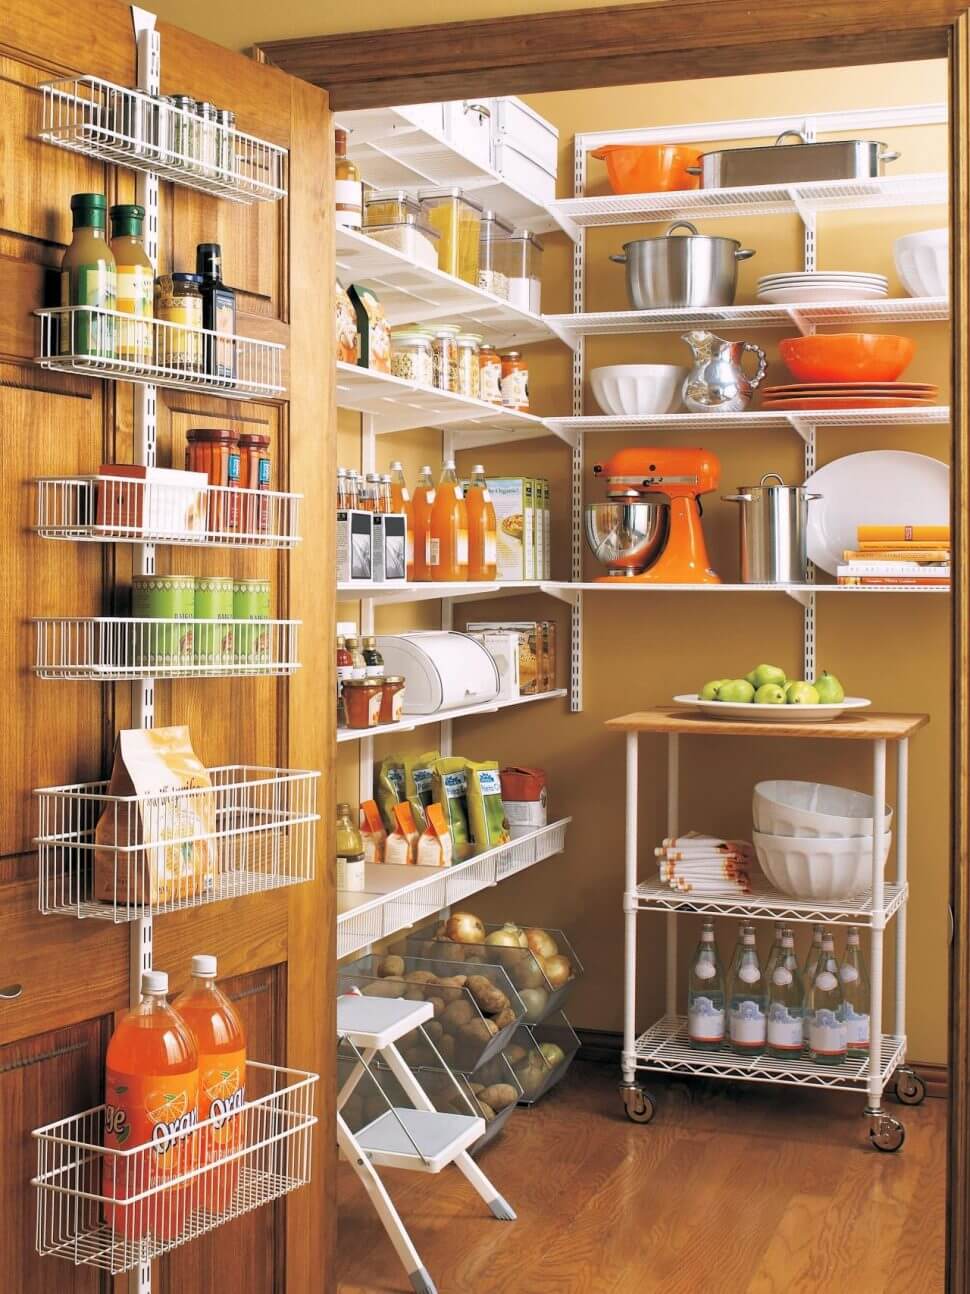 Airy Shelves for Food and Small Appliances